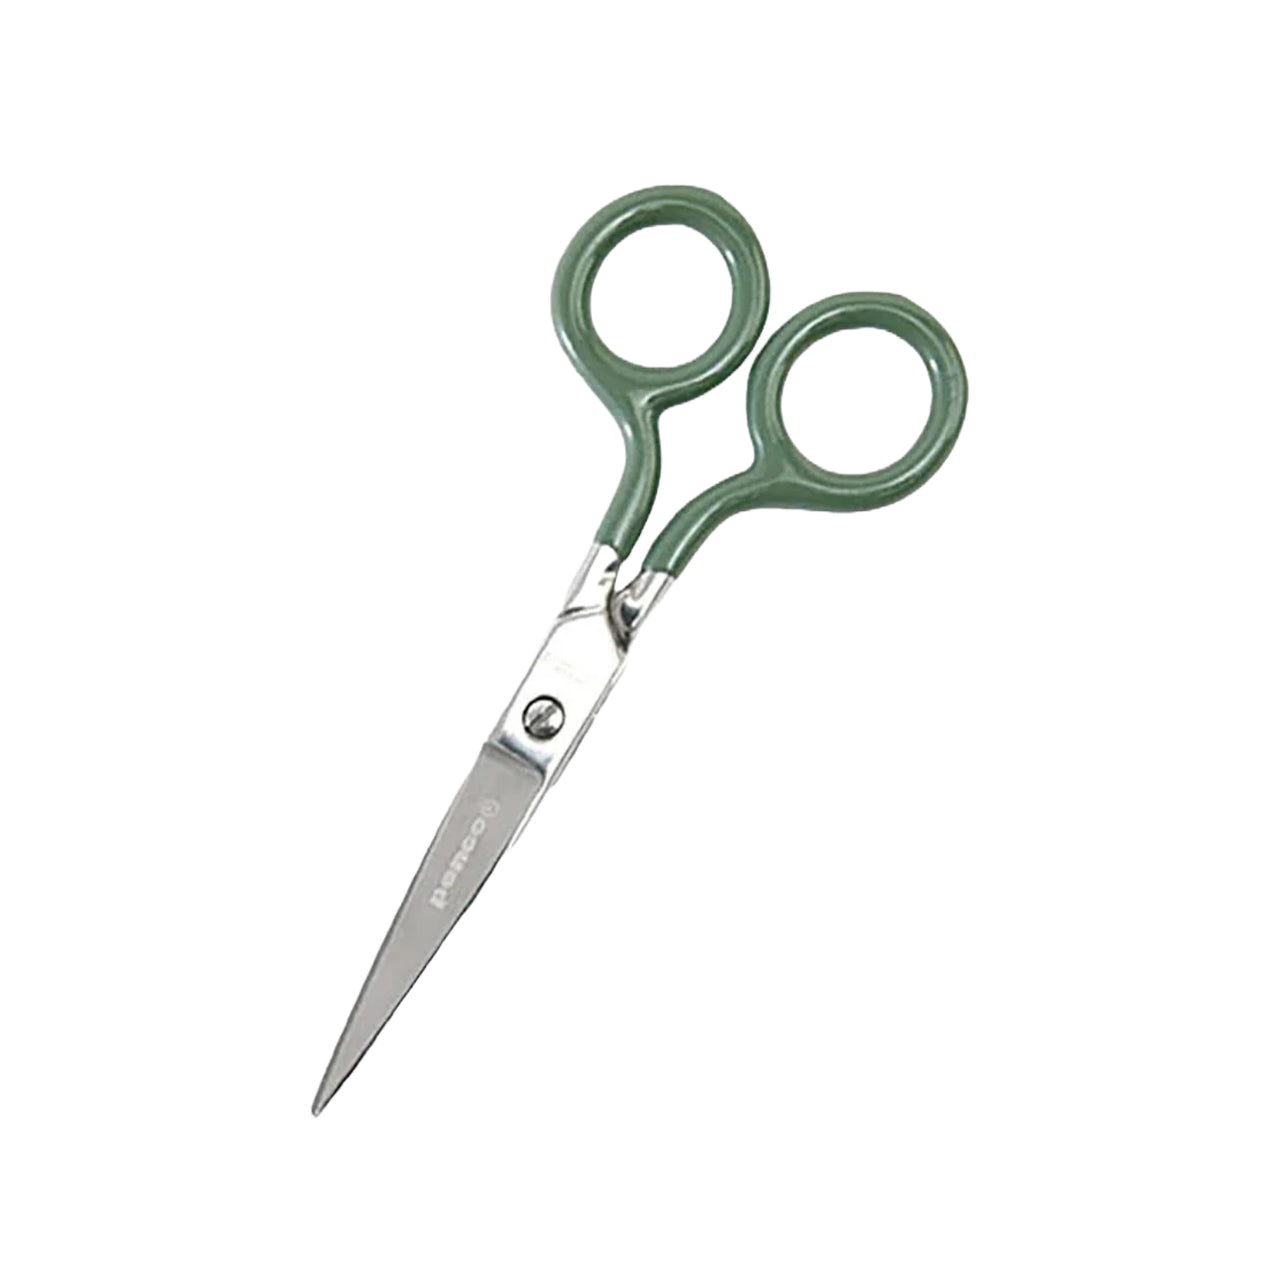 Stainless Steel Scissors Small | Green